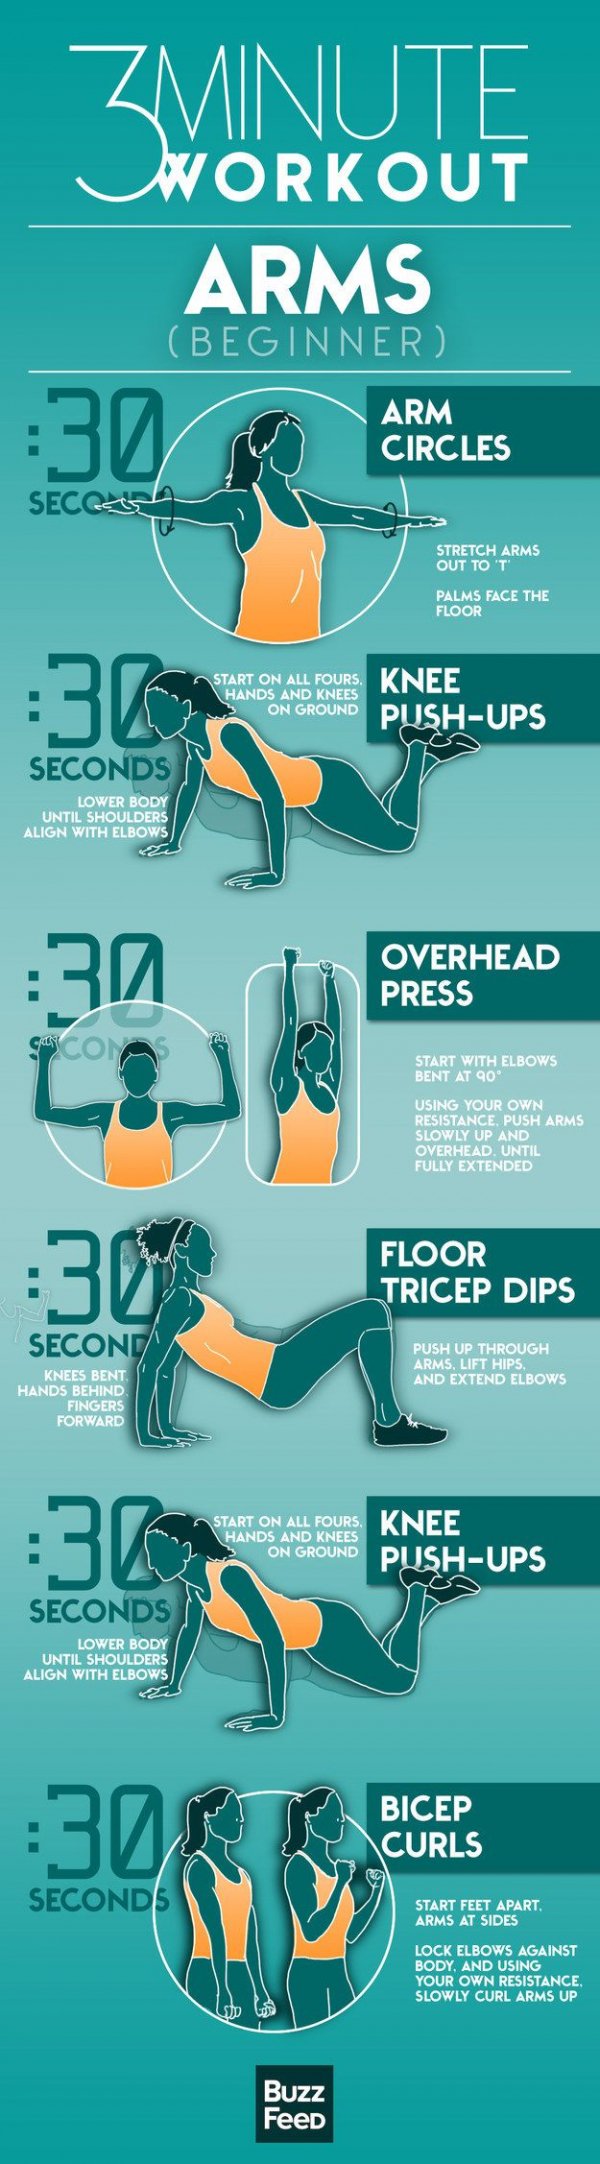 3 Minute Workout